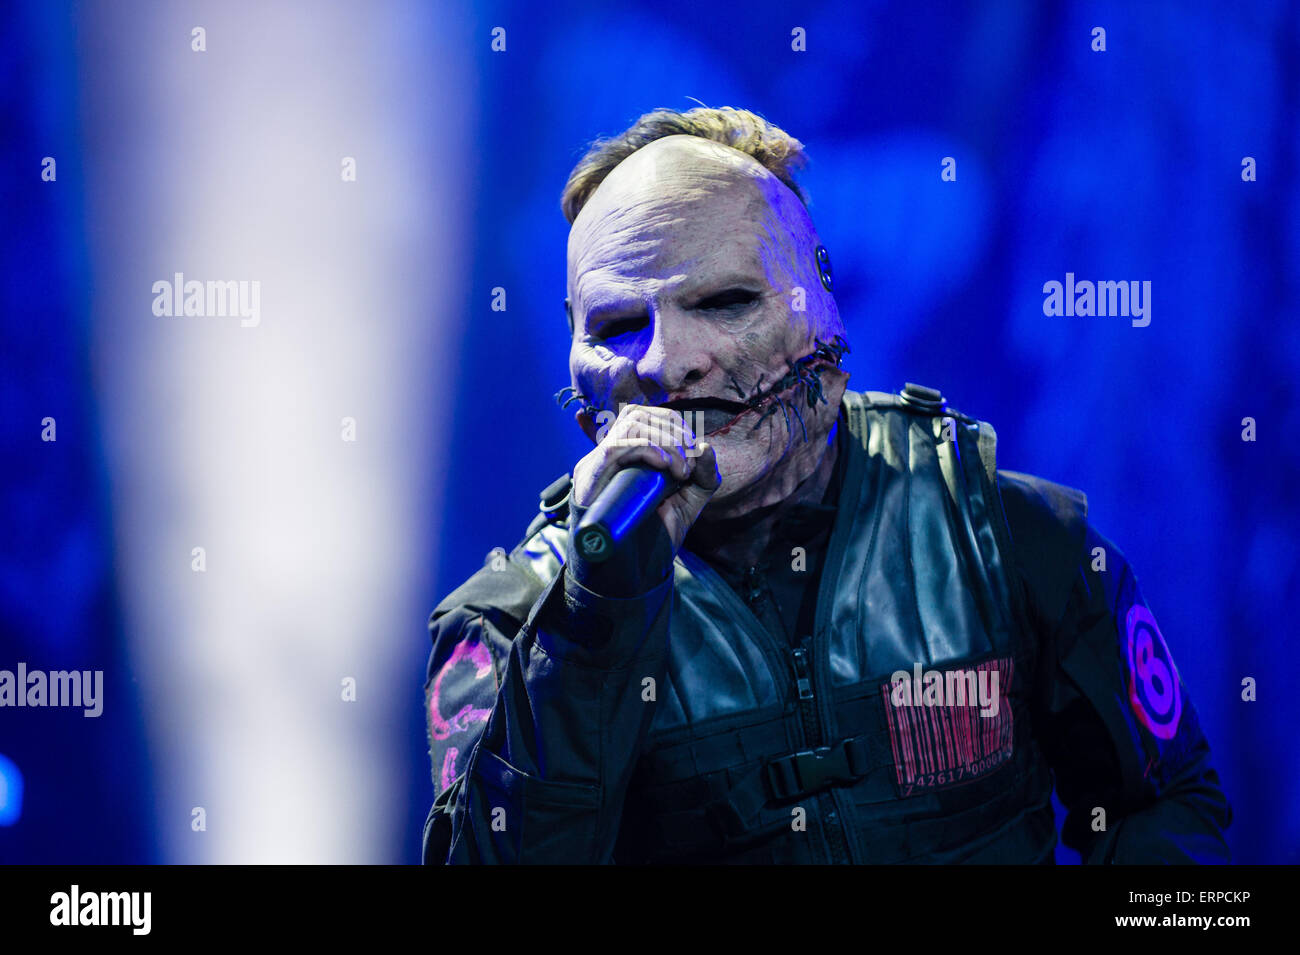 Nuenberg, Germany. 5th June, 2015. The singer and guitarist of American band Slipknot Corey Taylor plays at the music festival 'Rock im Park' in Nuenberg, Germany, 5 June 2015. The festival runs until 7 June 2015. Photo: Matthias Merz/dpa (ATTENTION EDITORS: EDITORIAL USE ONLY IN CONNECTION WITH REPORTING ON SLIPKNOT EDITORIAL USE ONLY)/dpa/Alamy Live News Stock Photo